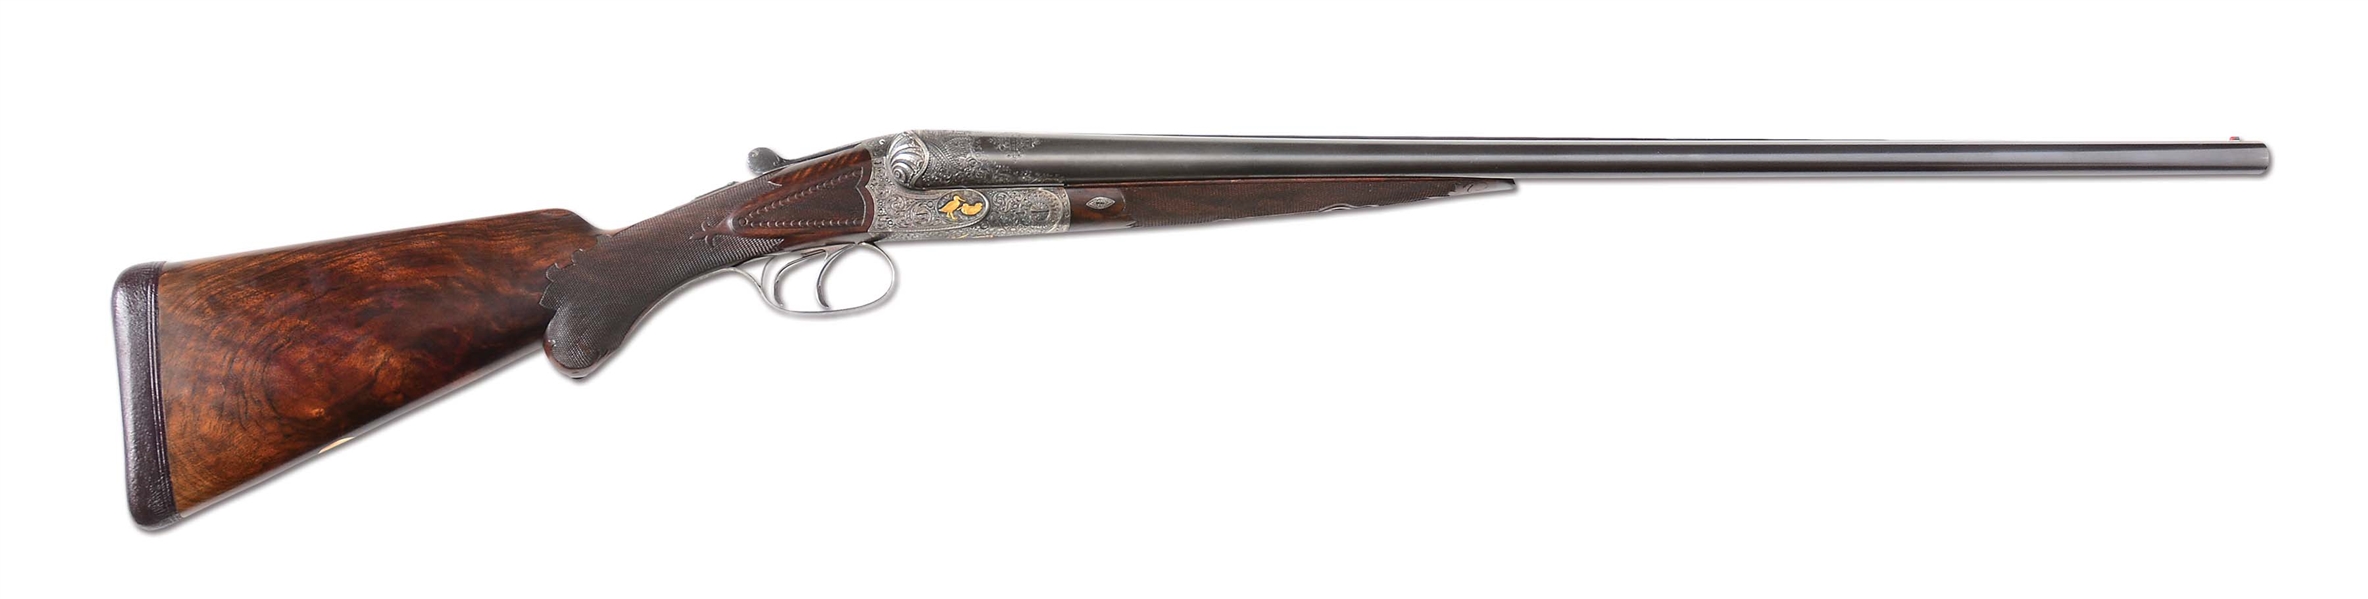 (A) MOSTLY ORIGINAL, AS FOUND, LAVISH CHARLES DALY REGENT DIAMOND BOXLOCK EJECTOR SHOTGUN WITH EXCEPTIONAL SCROLL ENGRAVING AND GOLD INLAYS.